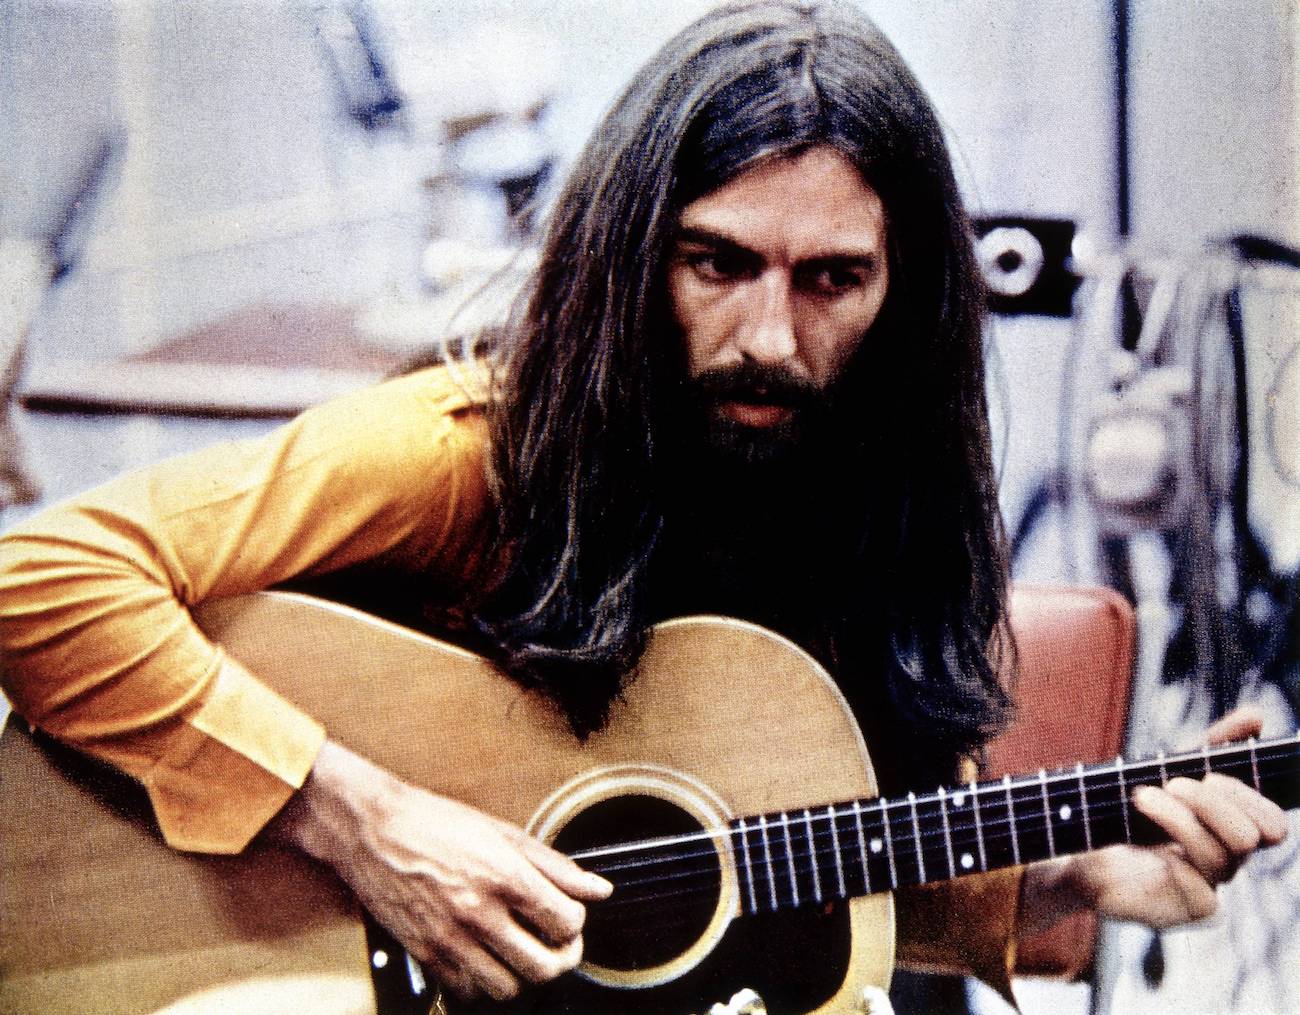 George Harrison in the recording studio wearing a yellow shirt and playing the guitar in 1970.